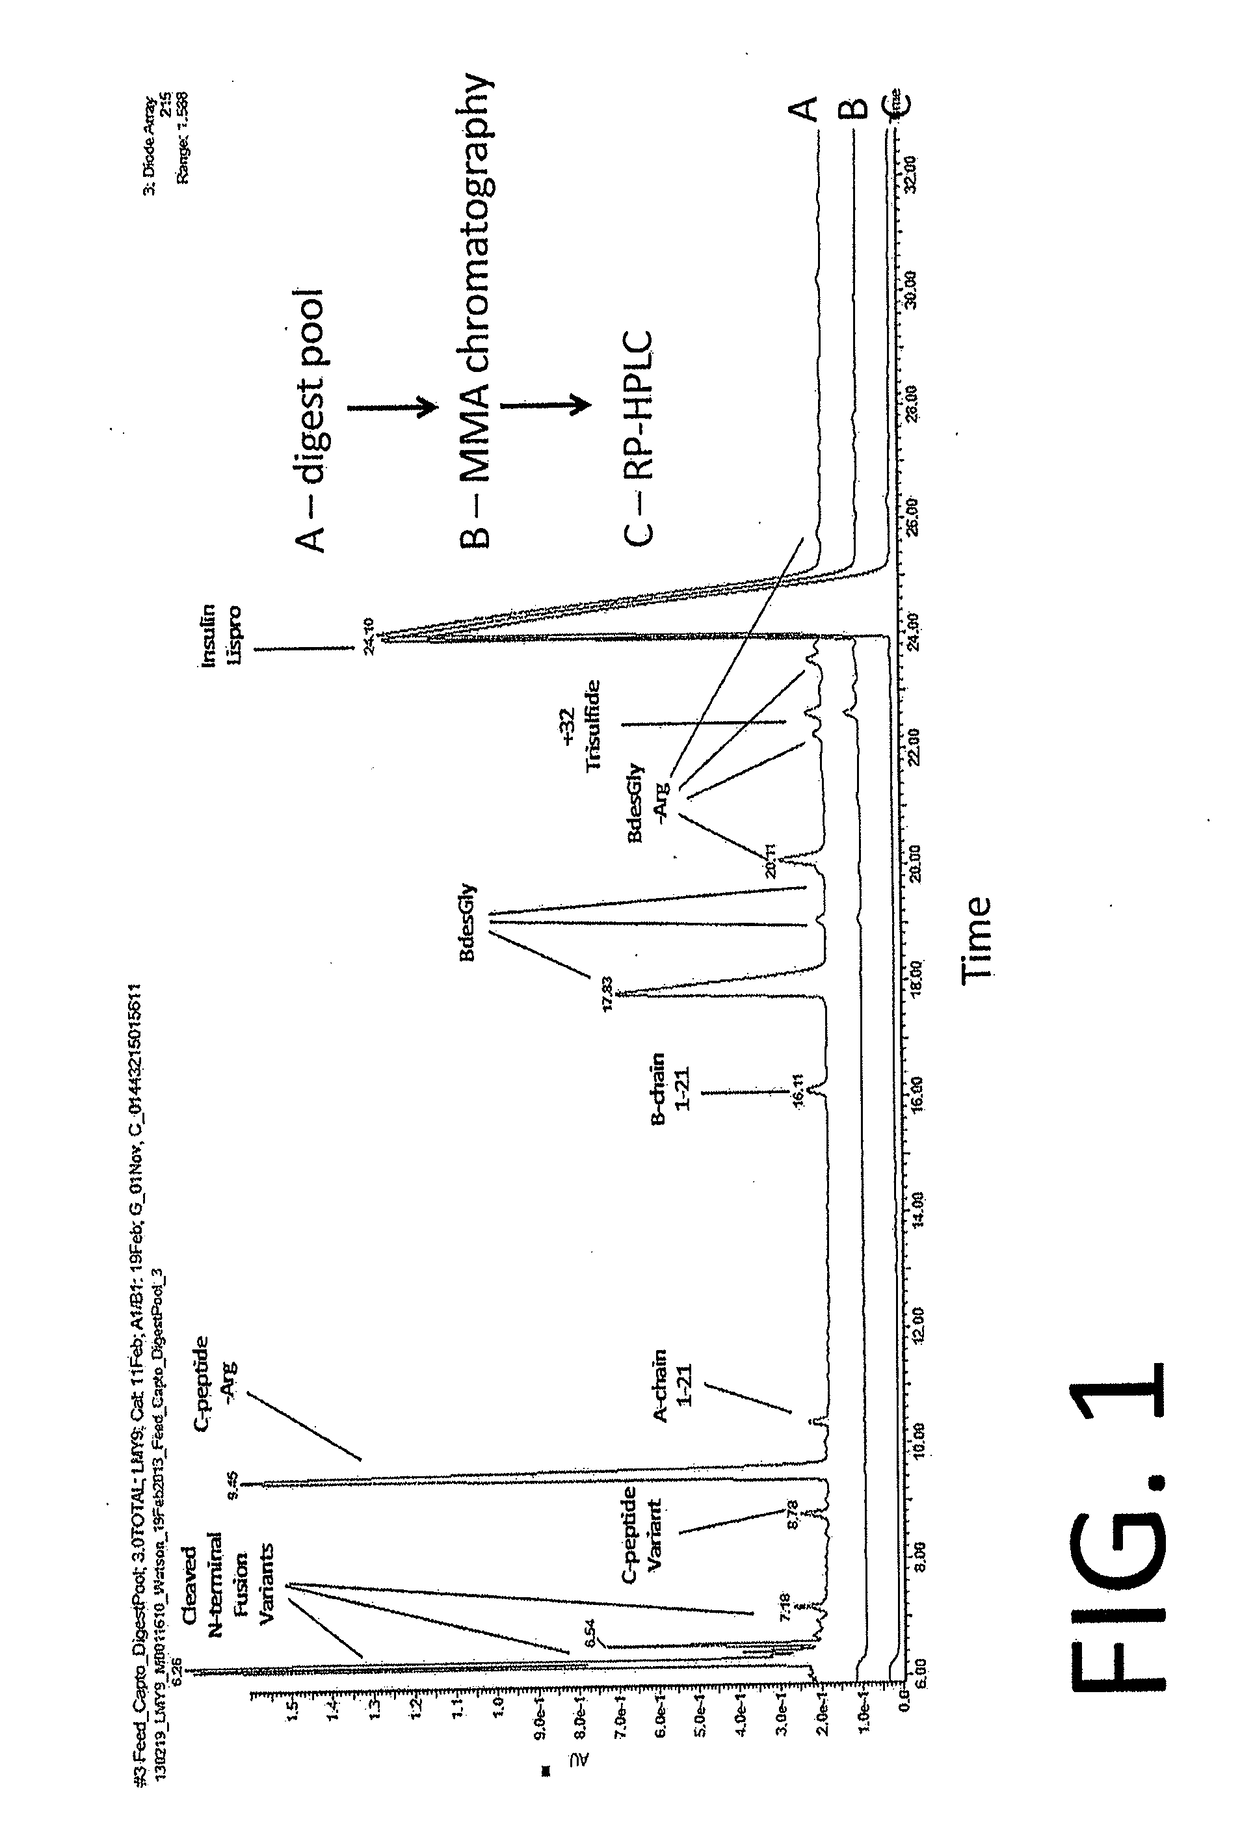 Chromatography process for purification of insulin and insulin analogs